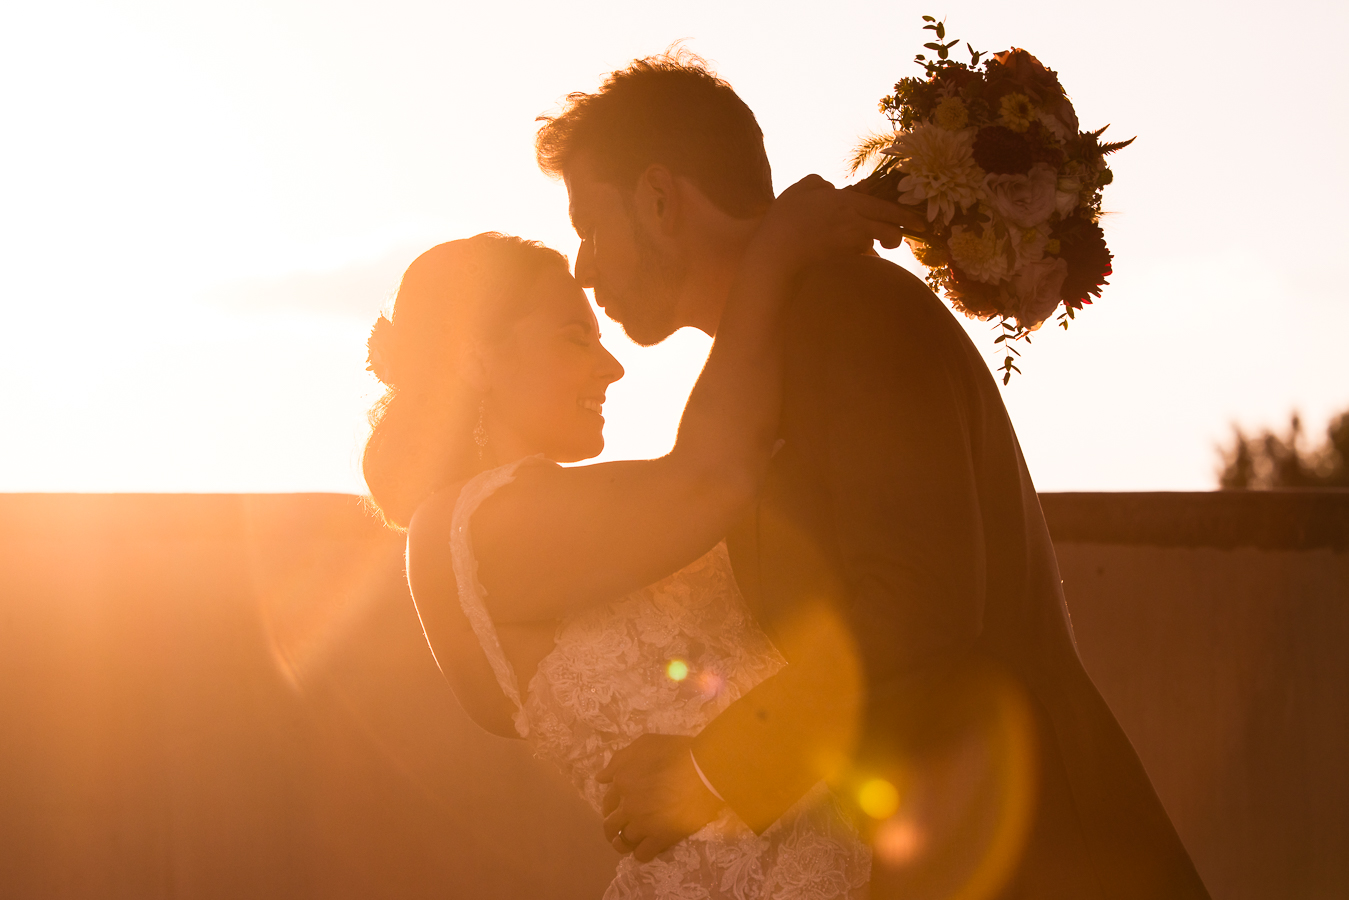 creative central pa wedding photographer, lisa rhinehart, captures this vibrant, golden hour image of the bride and groom as they lean in for a kiss during this branding photography session at alpine acres, a new wedding venue in warfordsburg, pa 